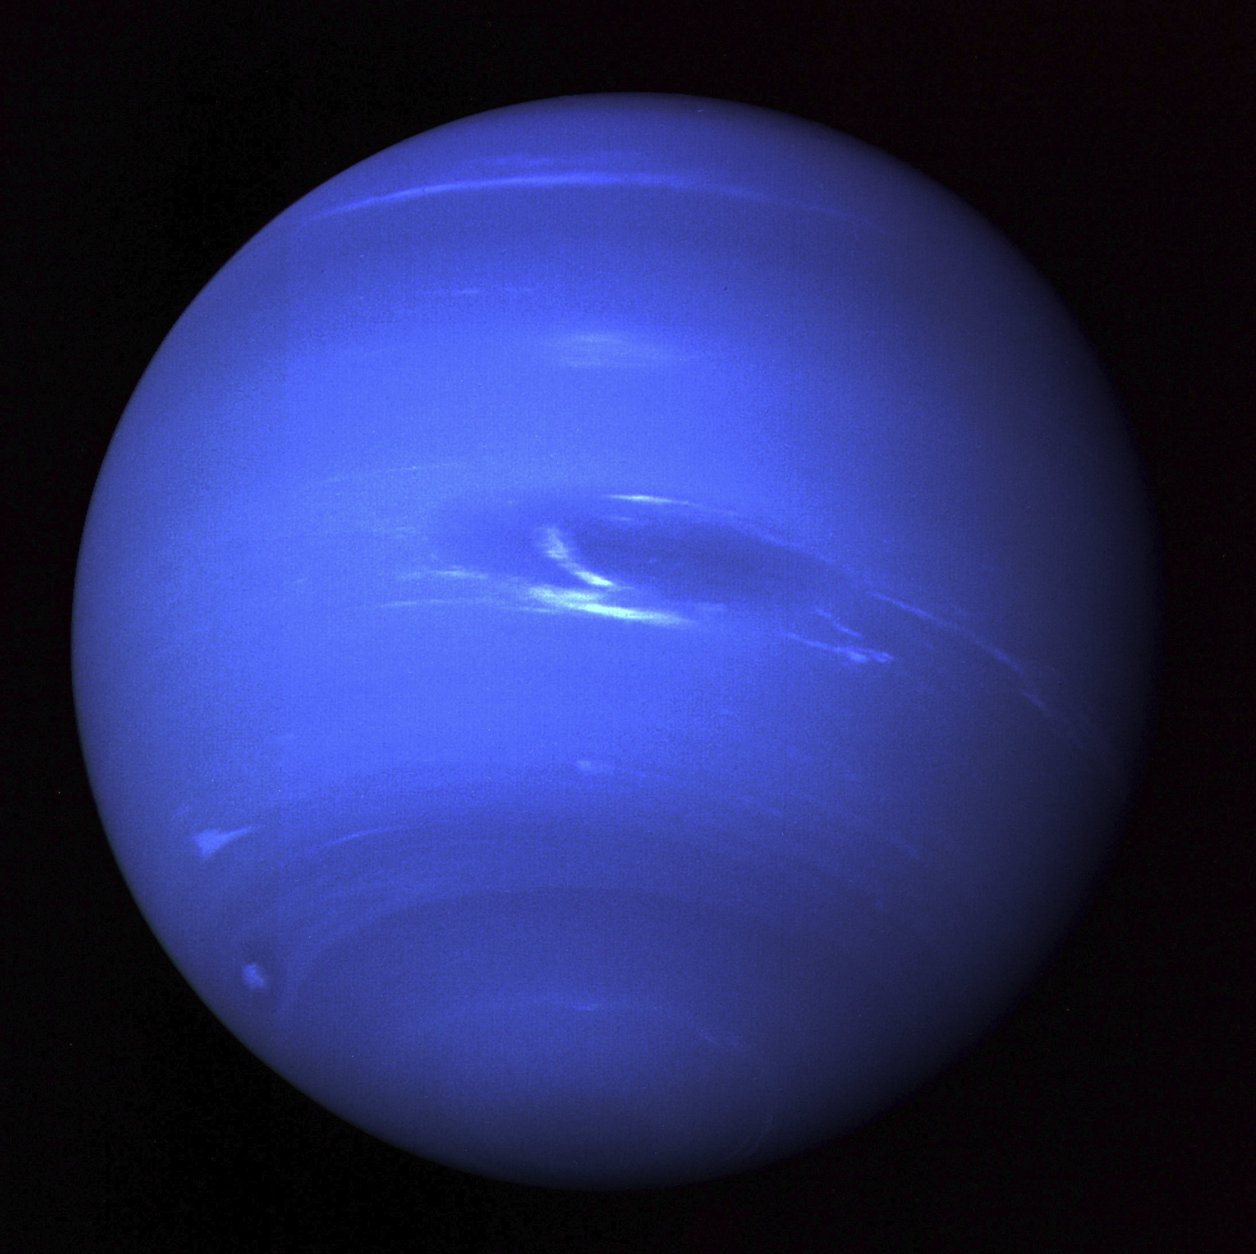 This Aug. 20, 1989 image made available by NASA shows the planet Neptune seen from the Voyager 2 spacecraft, at a range of 4.4 million miles from the planet. (NASA via AP)